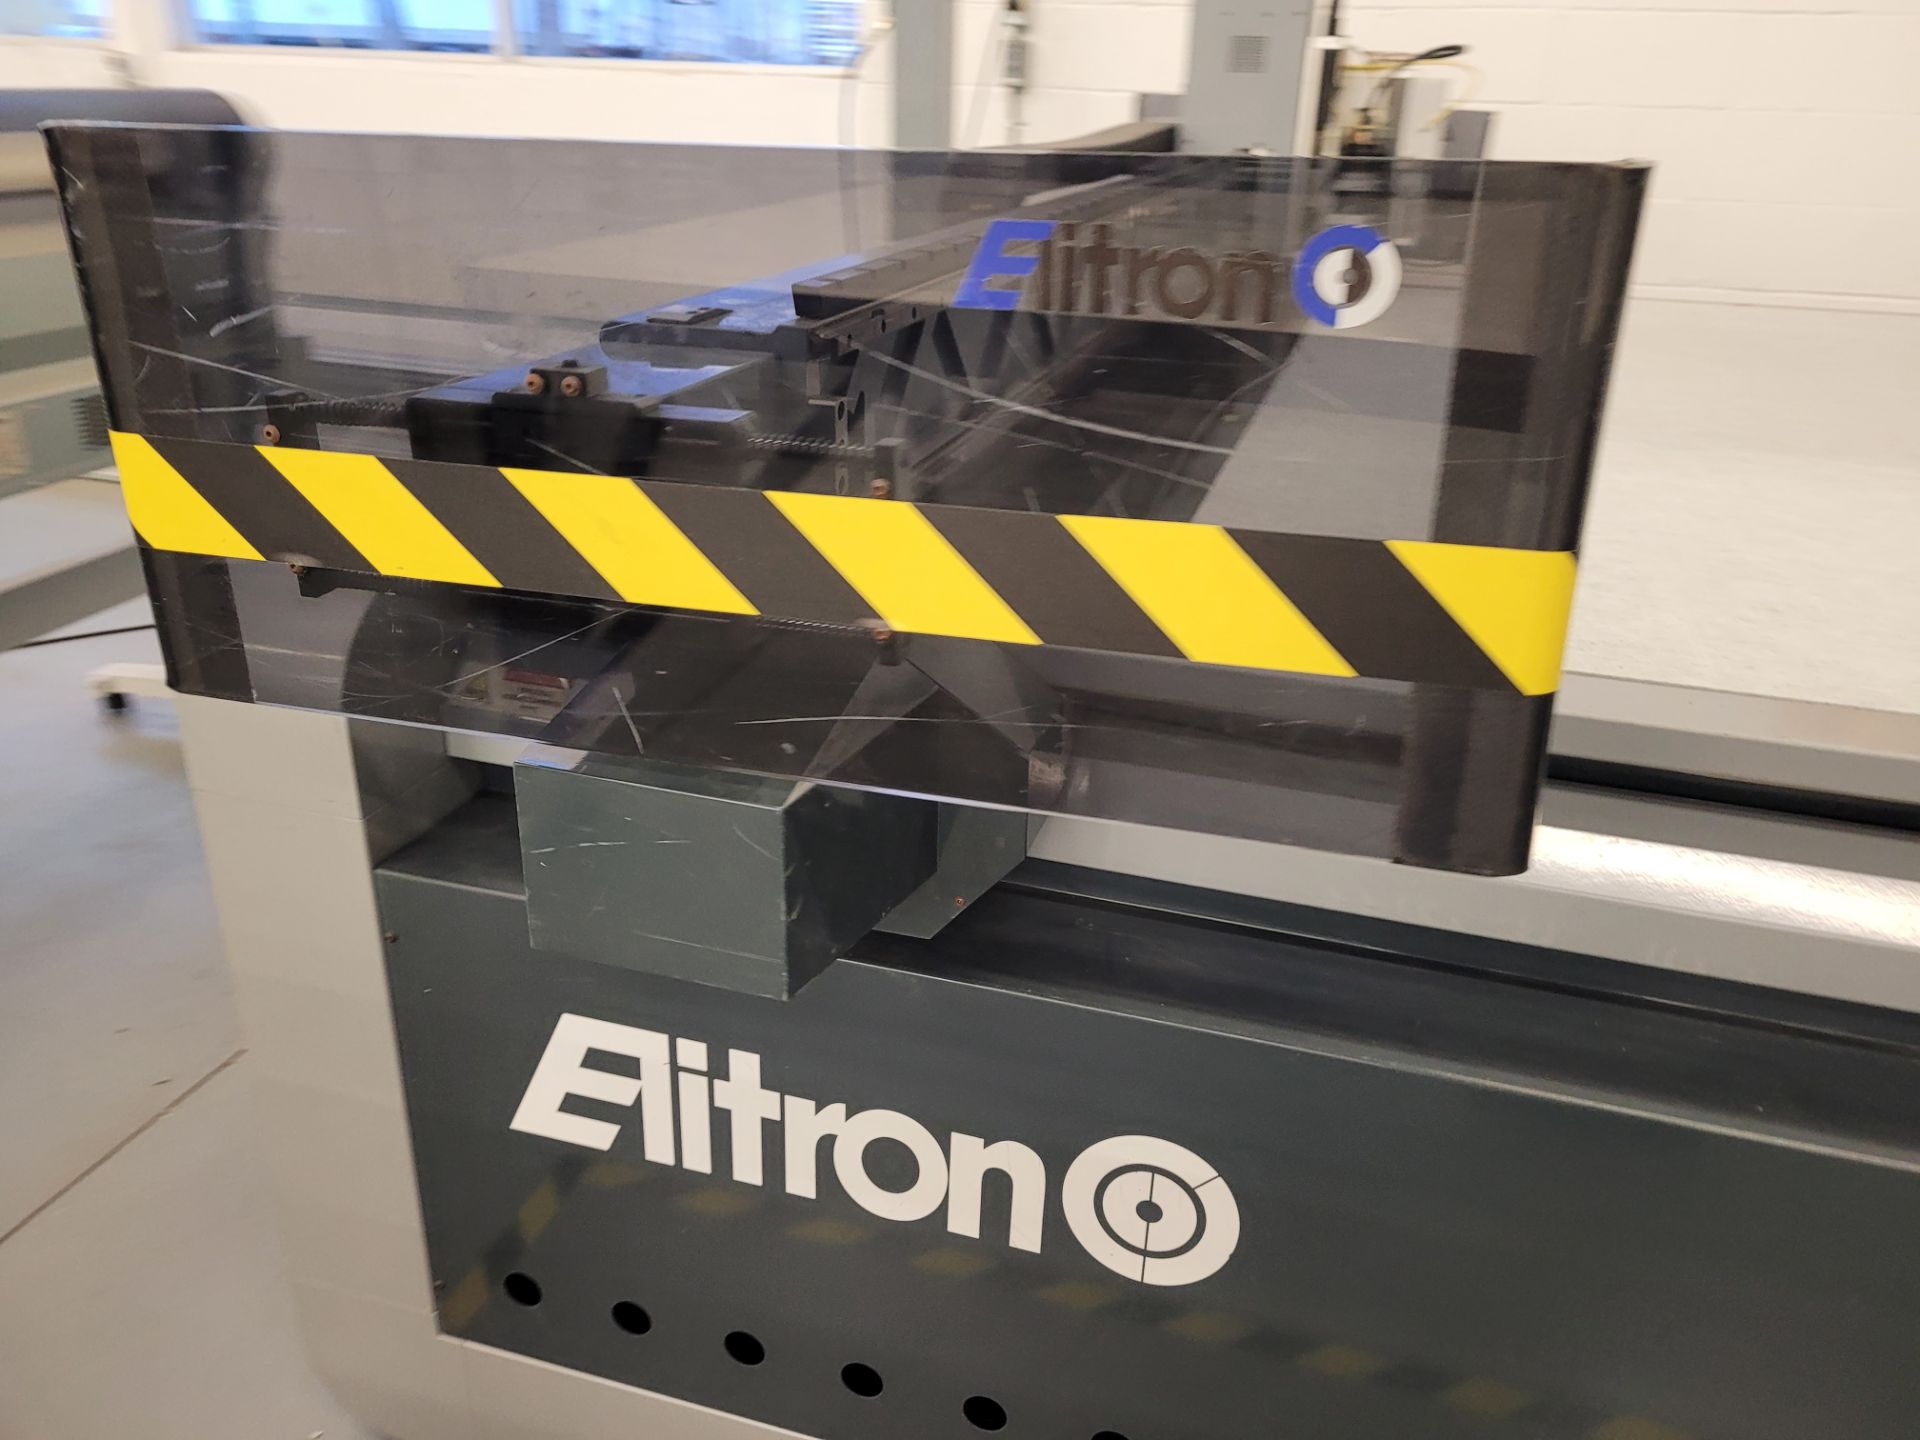 2014 ELITRON CAM mod. Kombo 3120 SD Automatic Cutting System, ser. 303141683G, 3PH, with air tank an - Image 33 of 46